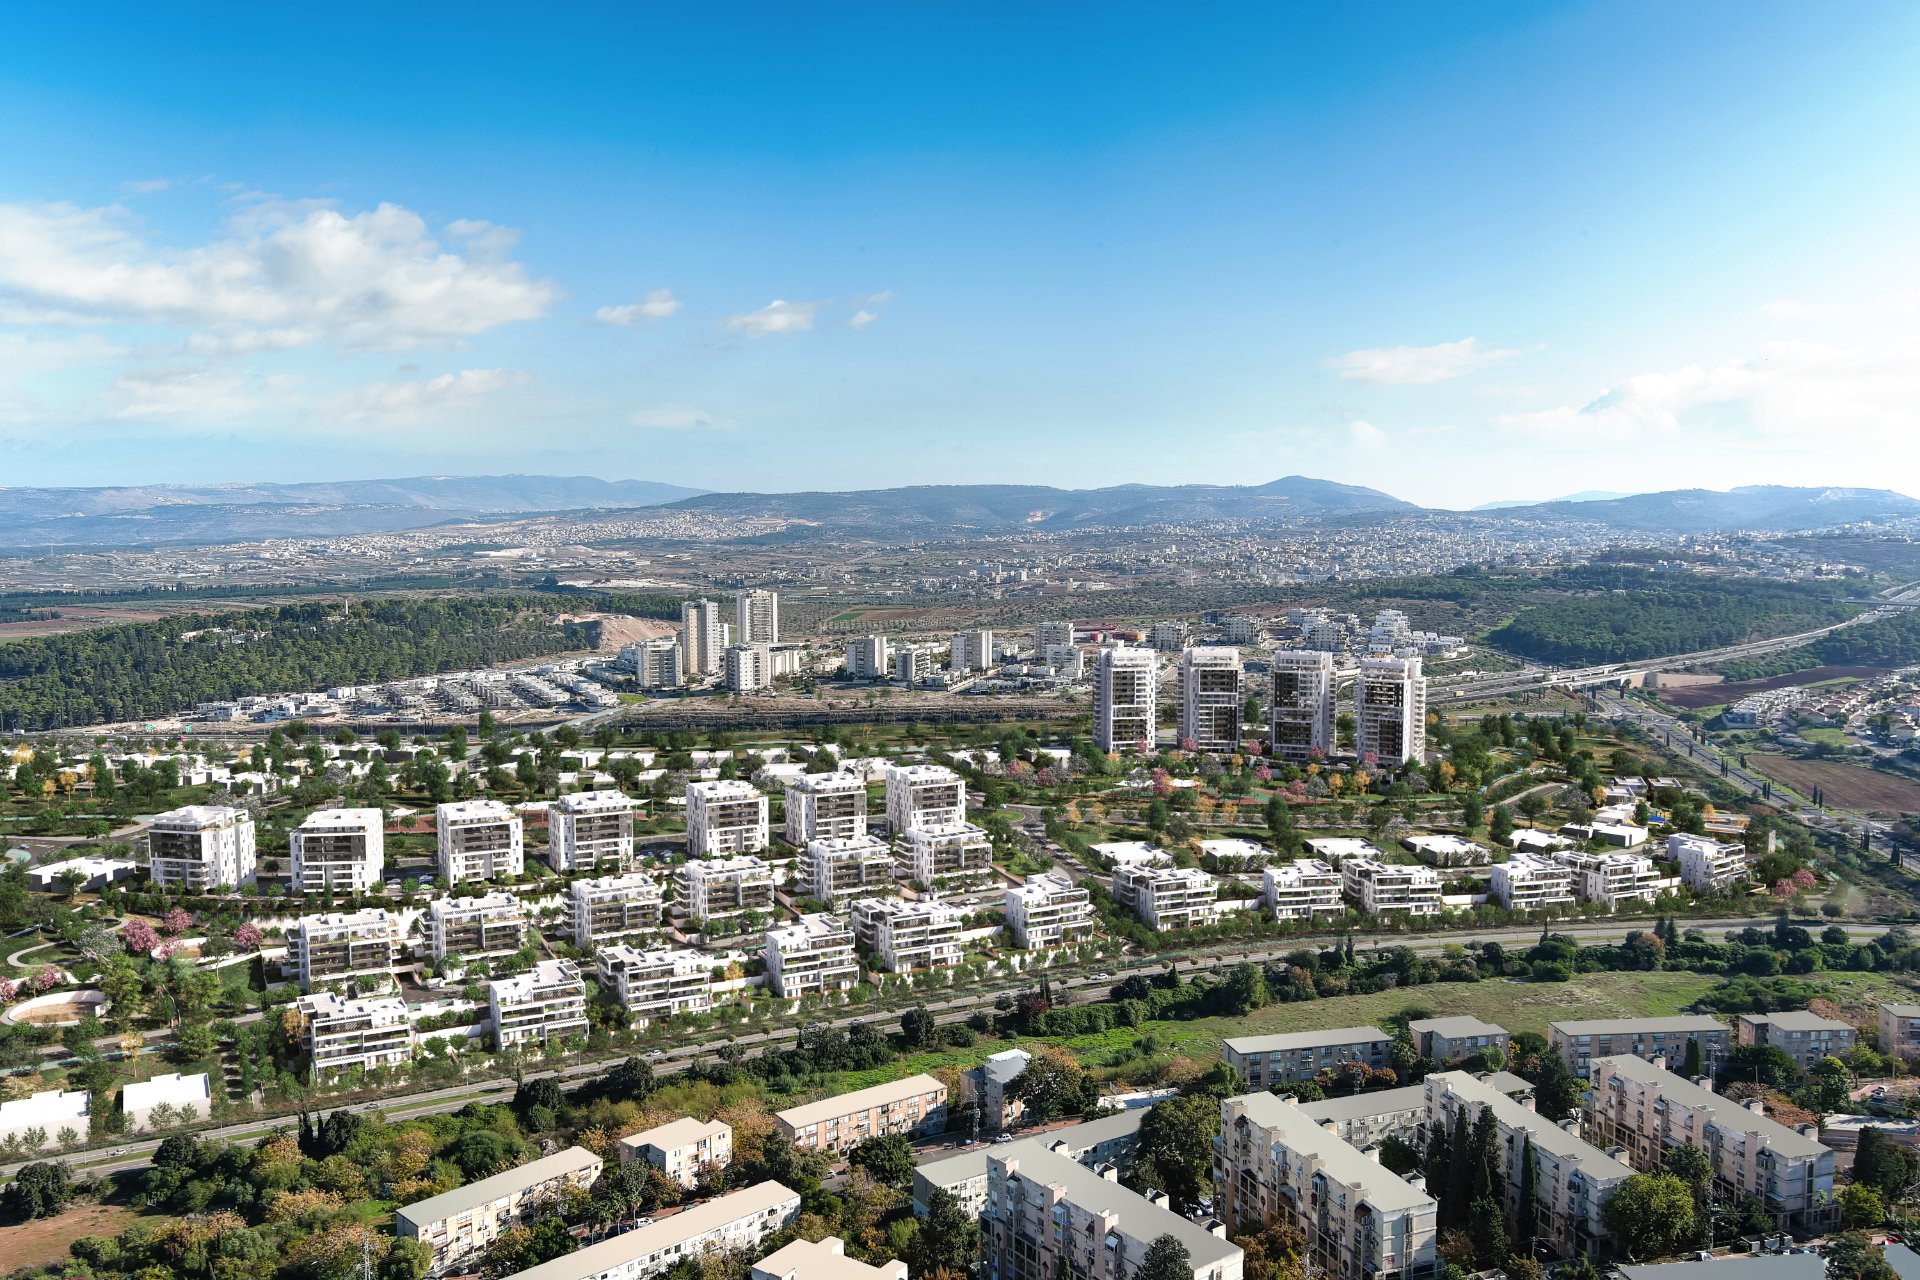 Photograph from the air of Kiryat Ata's project